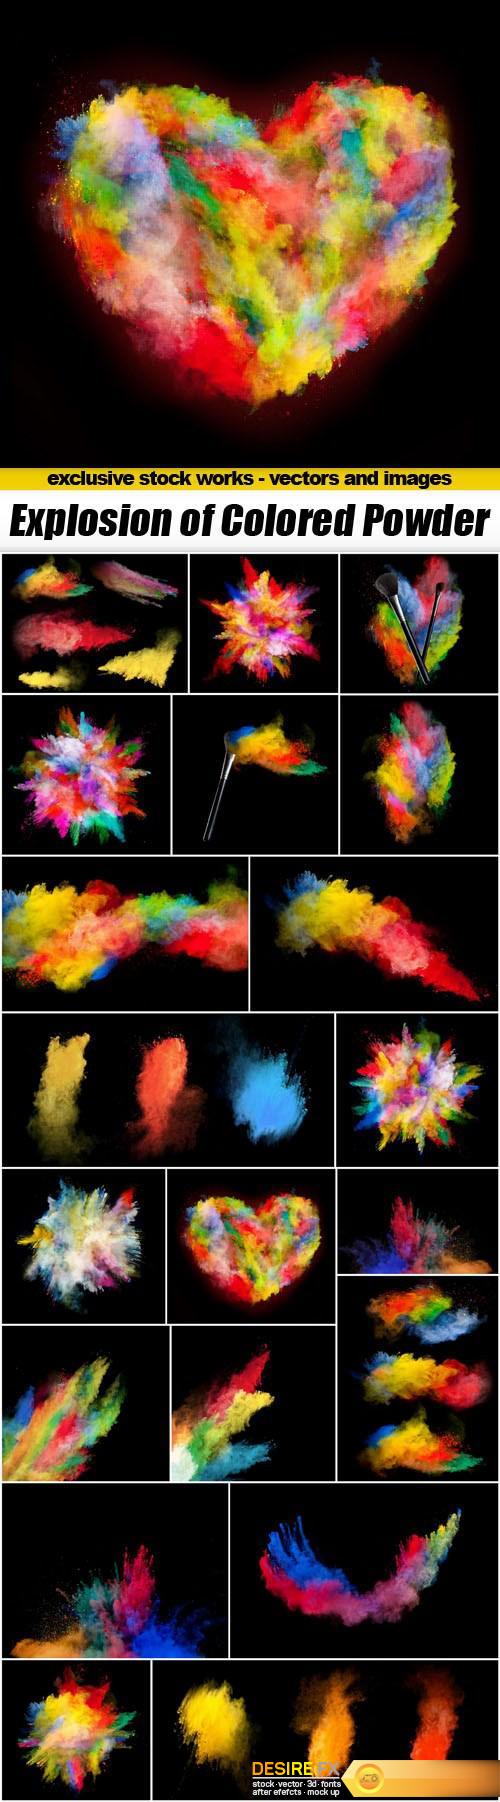 Explosion of Colored Powder - 20xUHQ JPEG